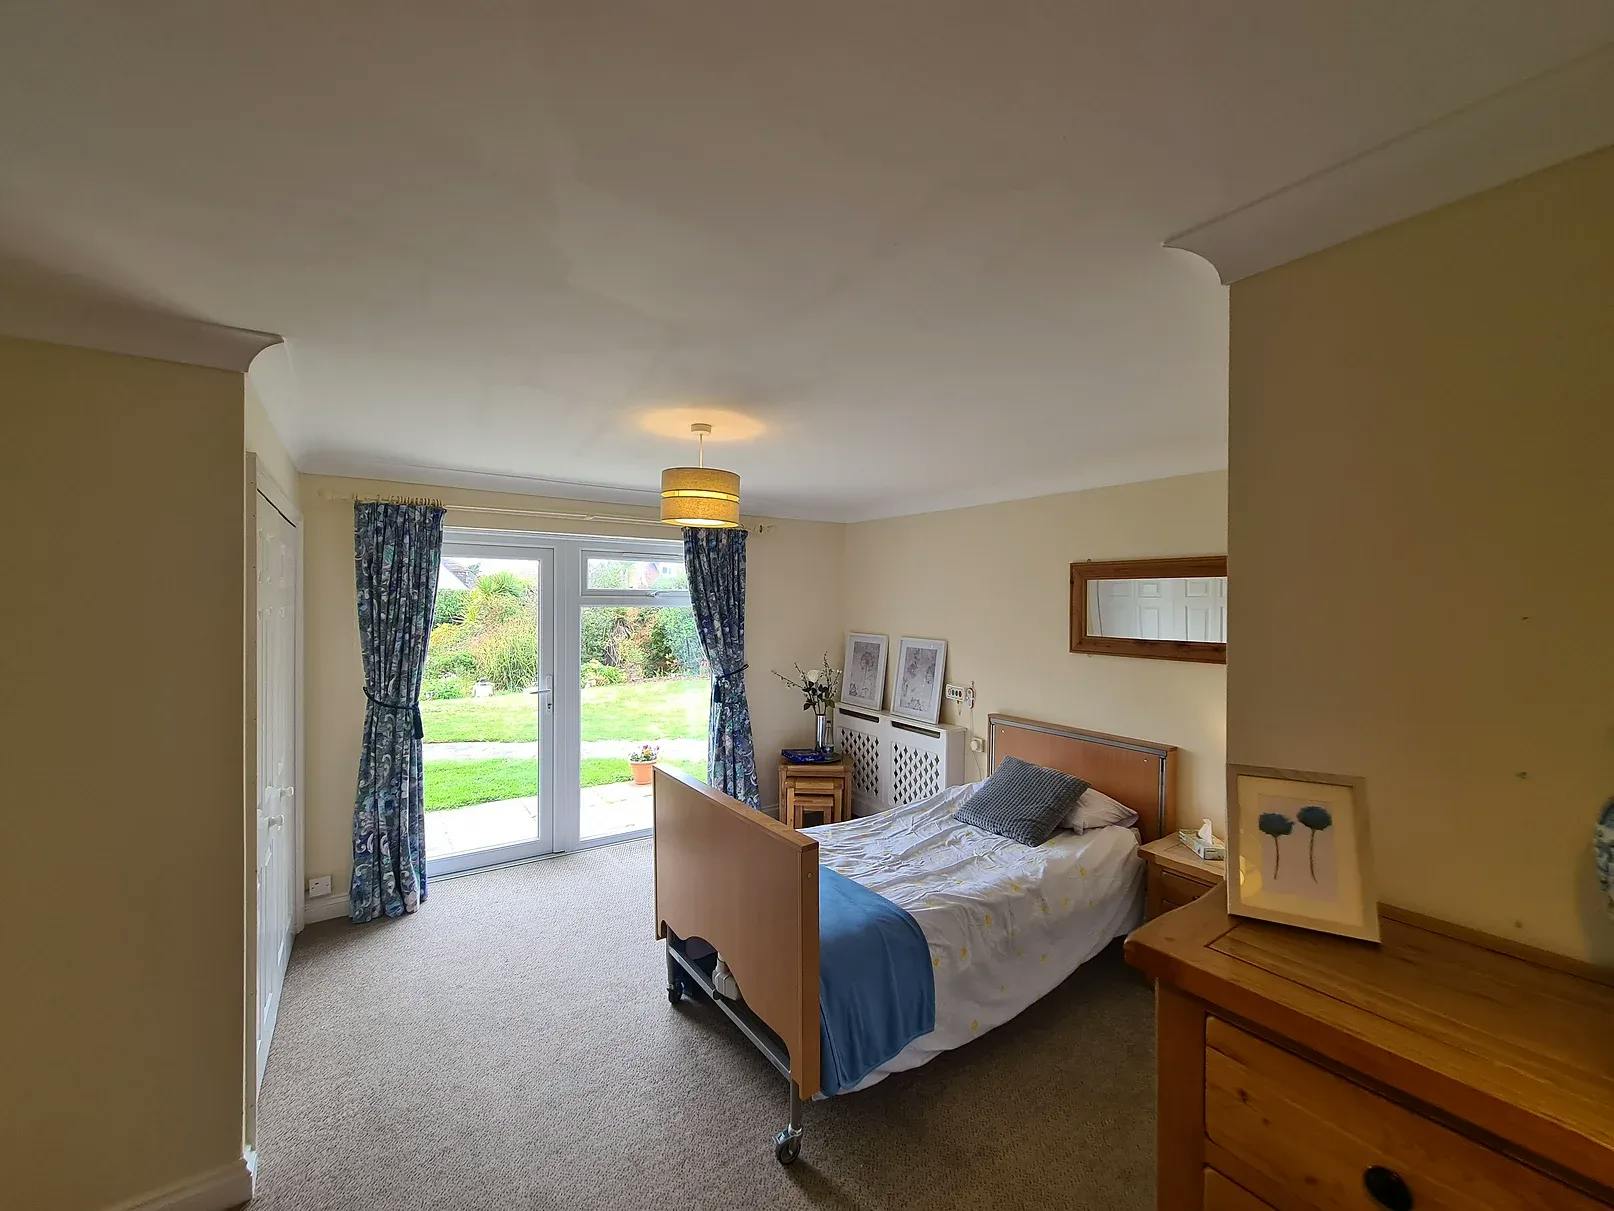 Sussex Grange Care Home in Selsey